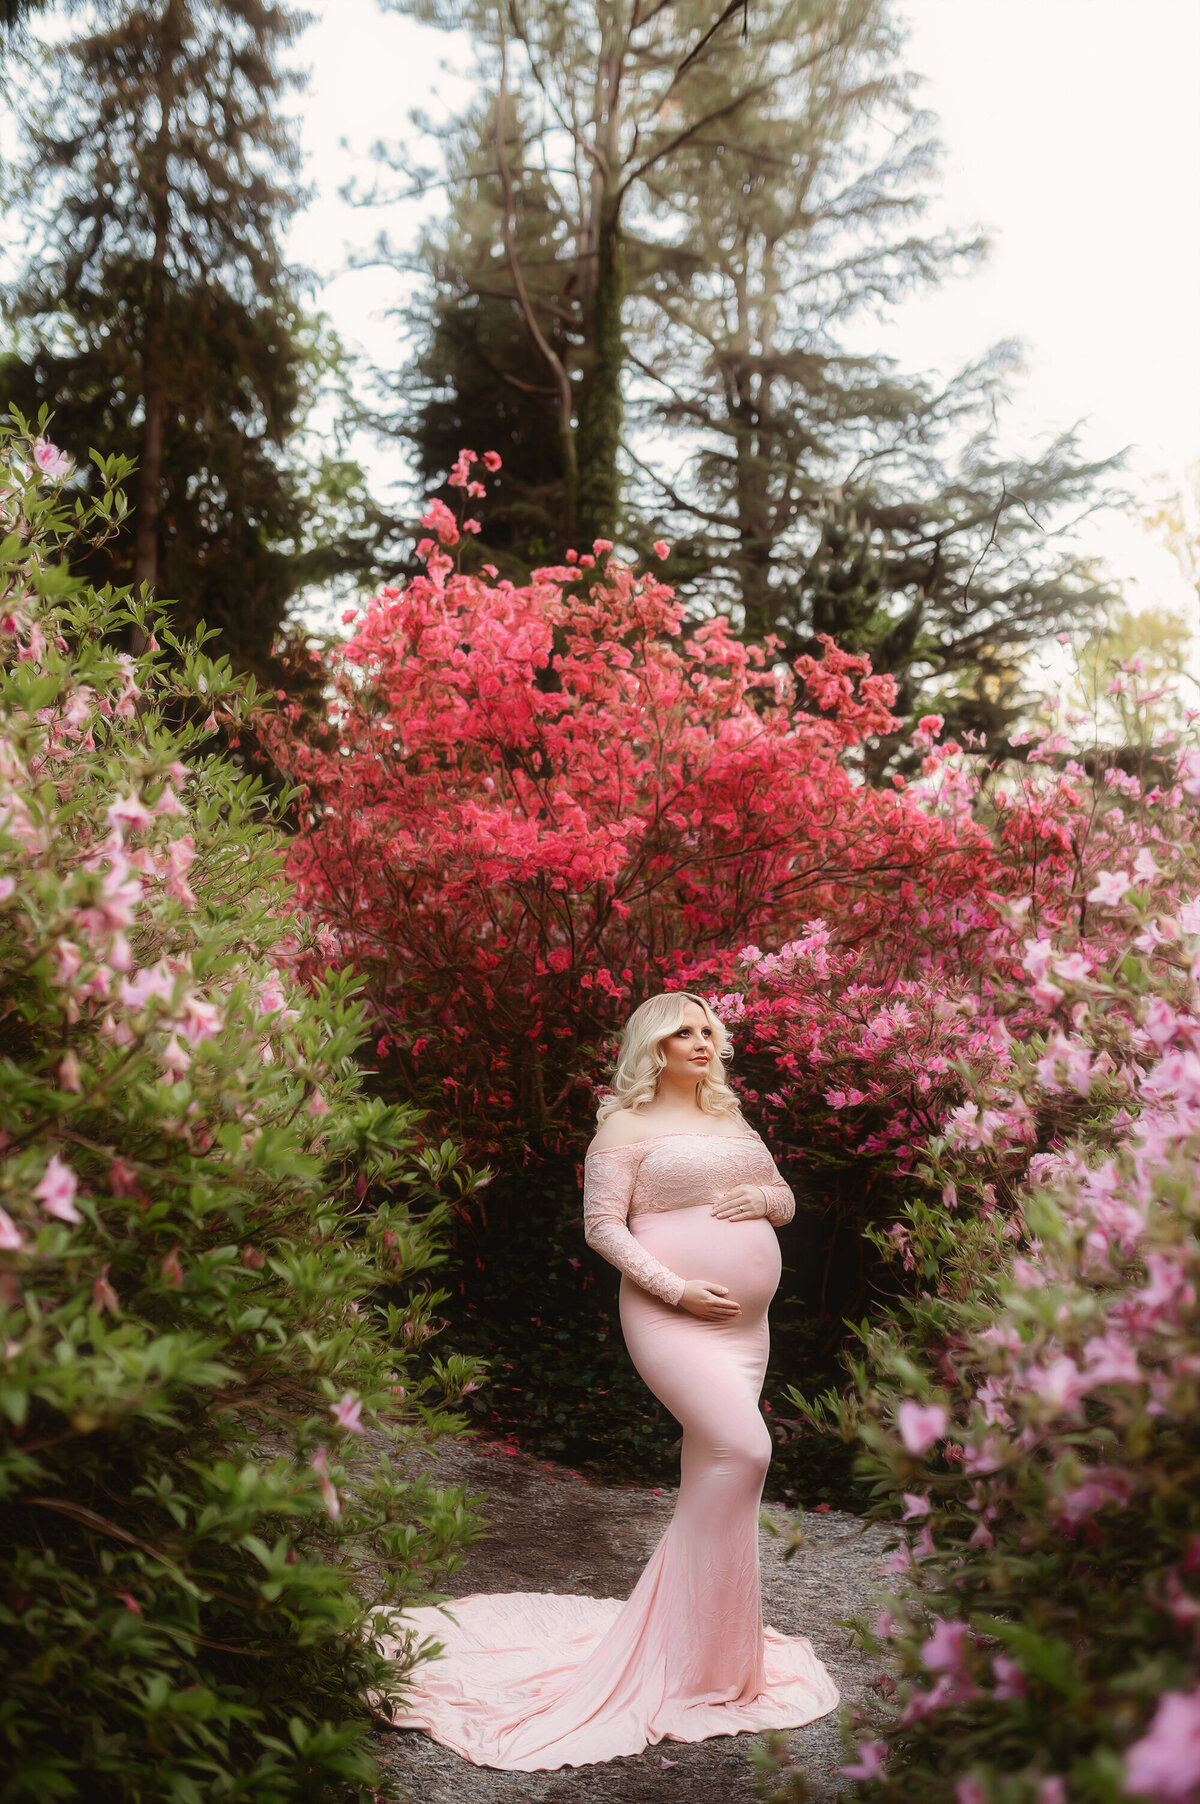 Pregnant woman poses for Maternity Photos at Biltmore in Asheville, NC.